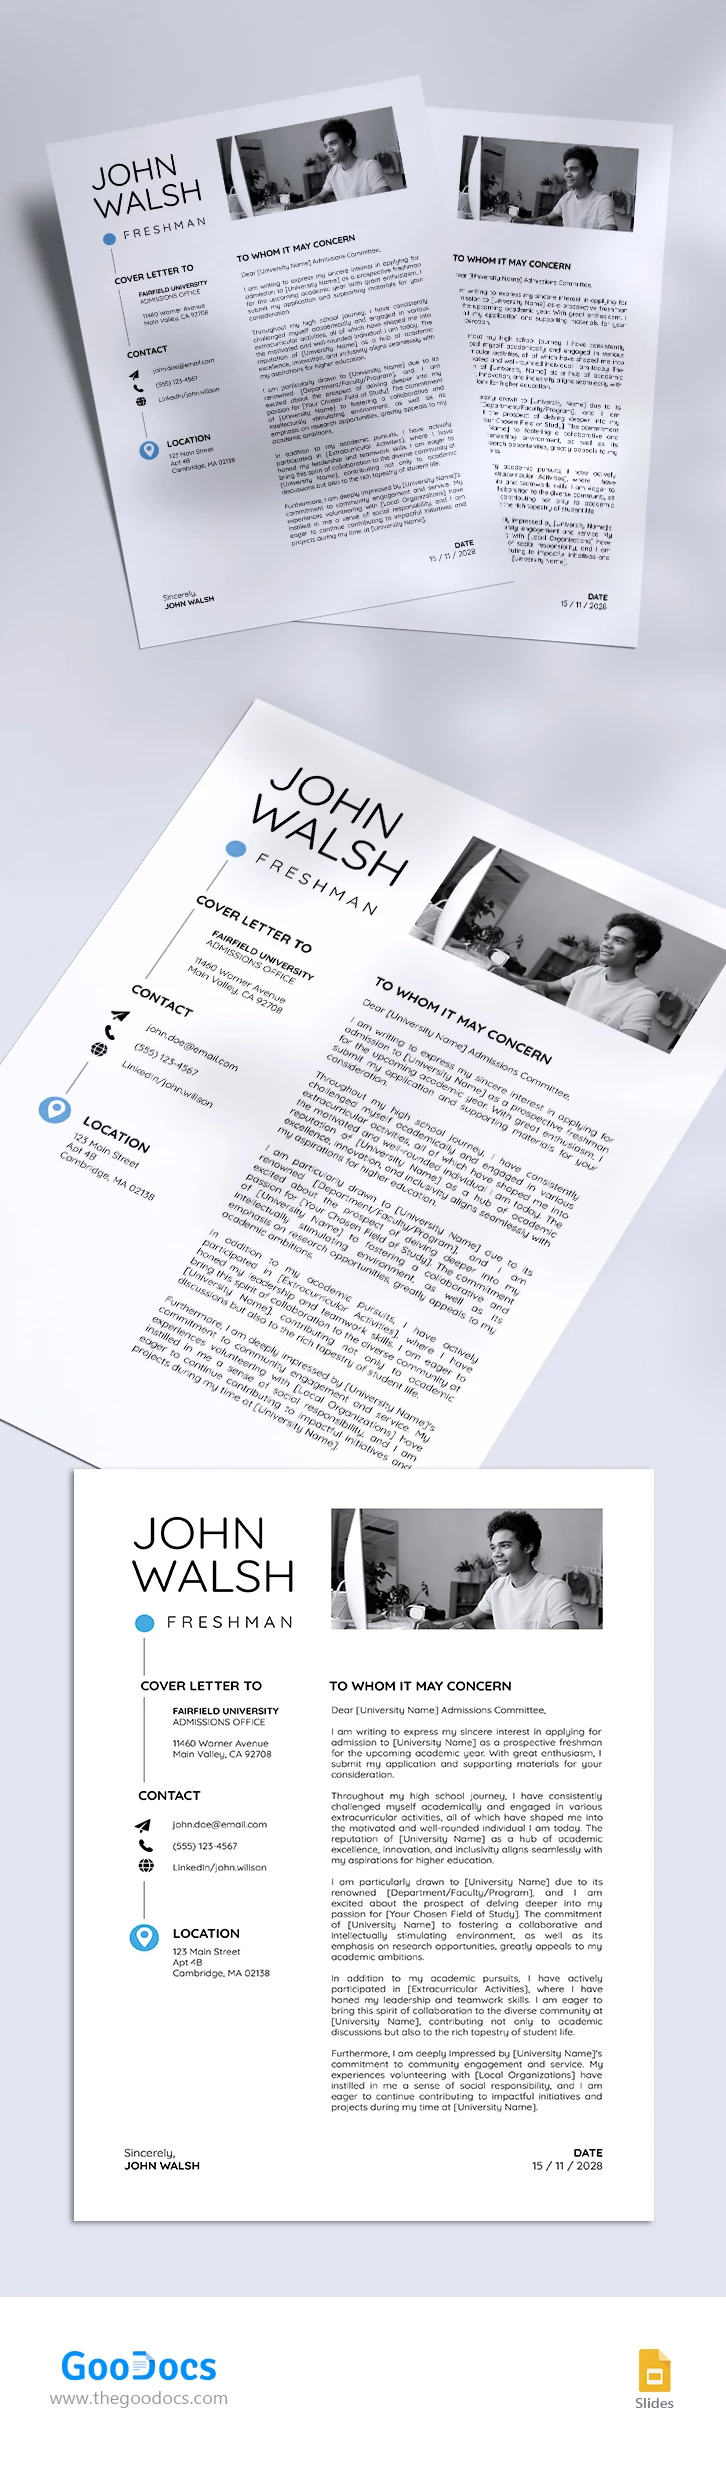 College Resume Cover Letter - free Google Docs Template - 10068019